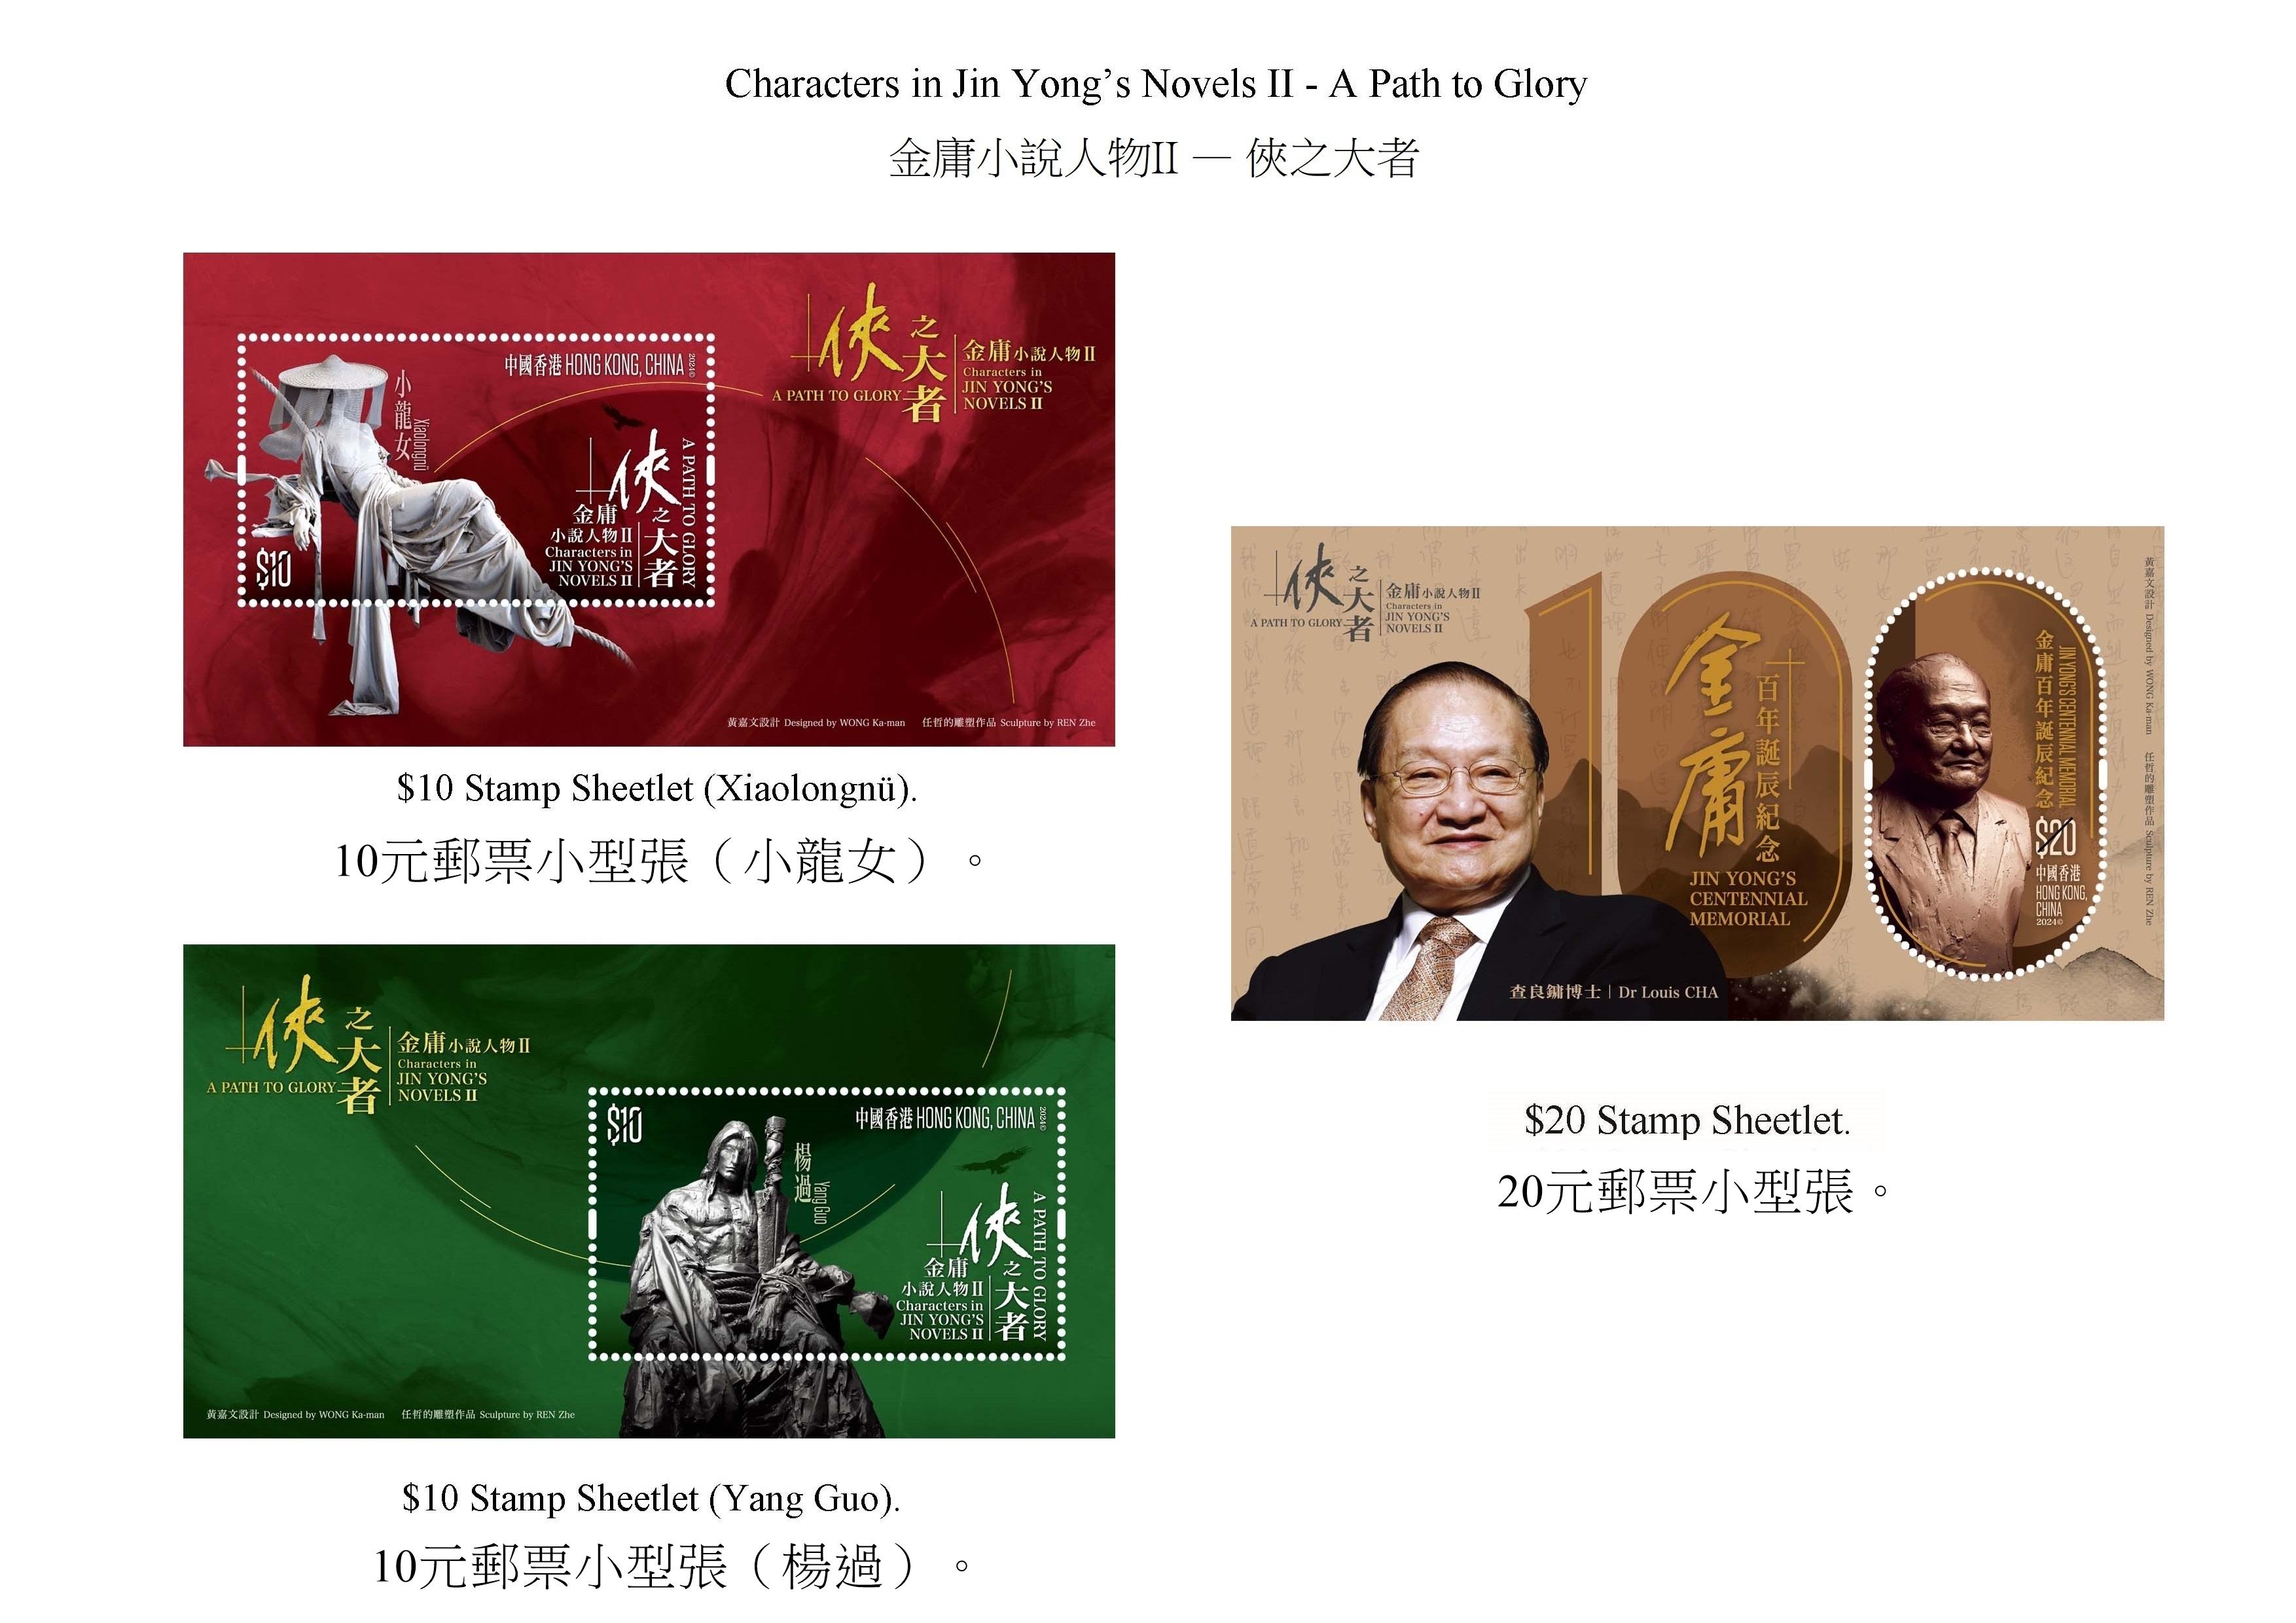 Hongkong Post will launch a special stamp issue and associated philatelic products on the theme of "Characters in Jin Yong's Novels II - A Path to Glory" on March 14 (Thursday). Photo shows the stamp sheetlets.

